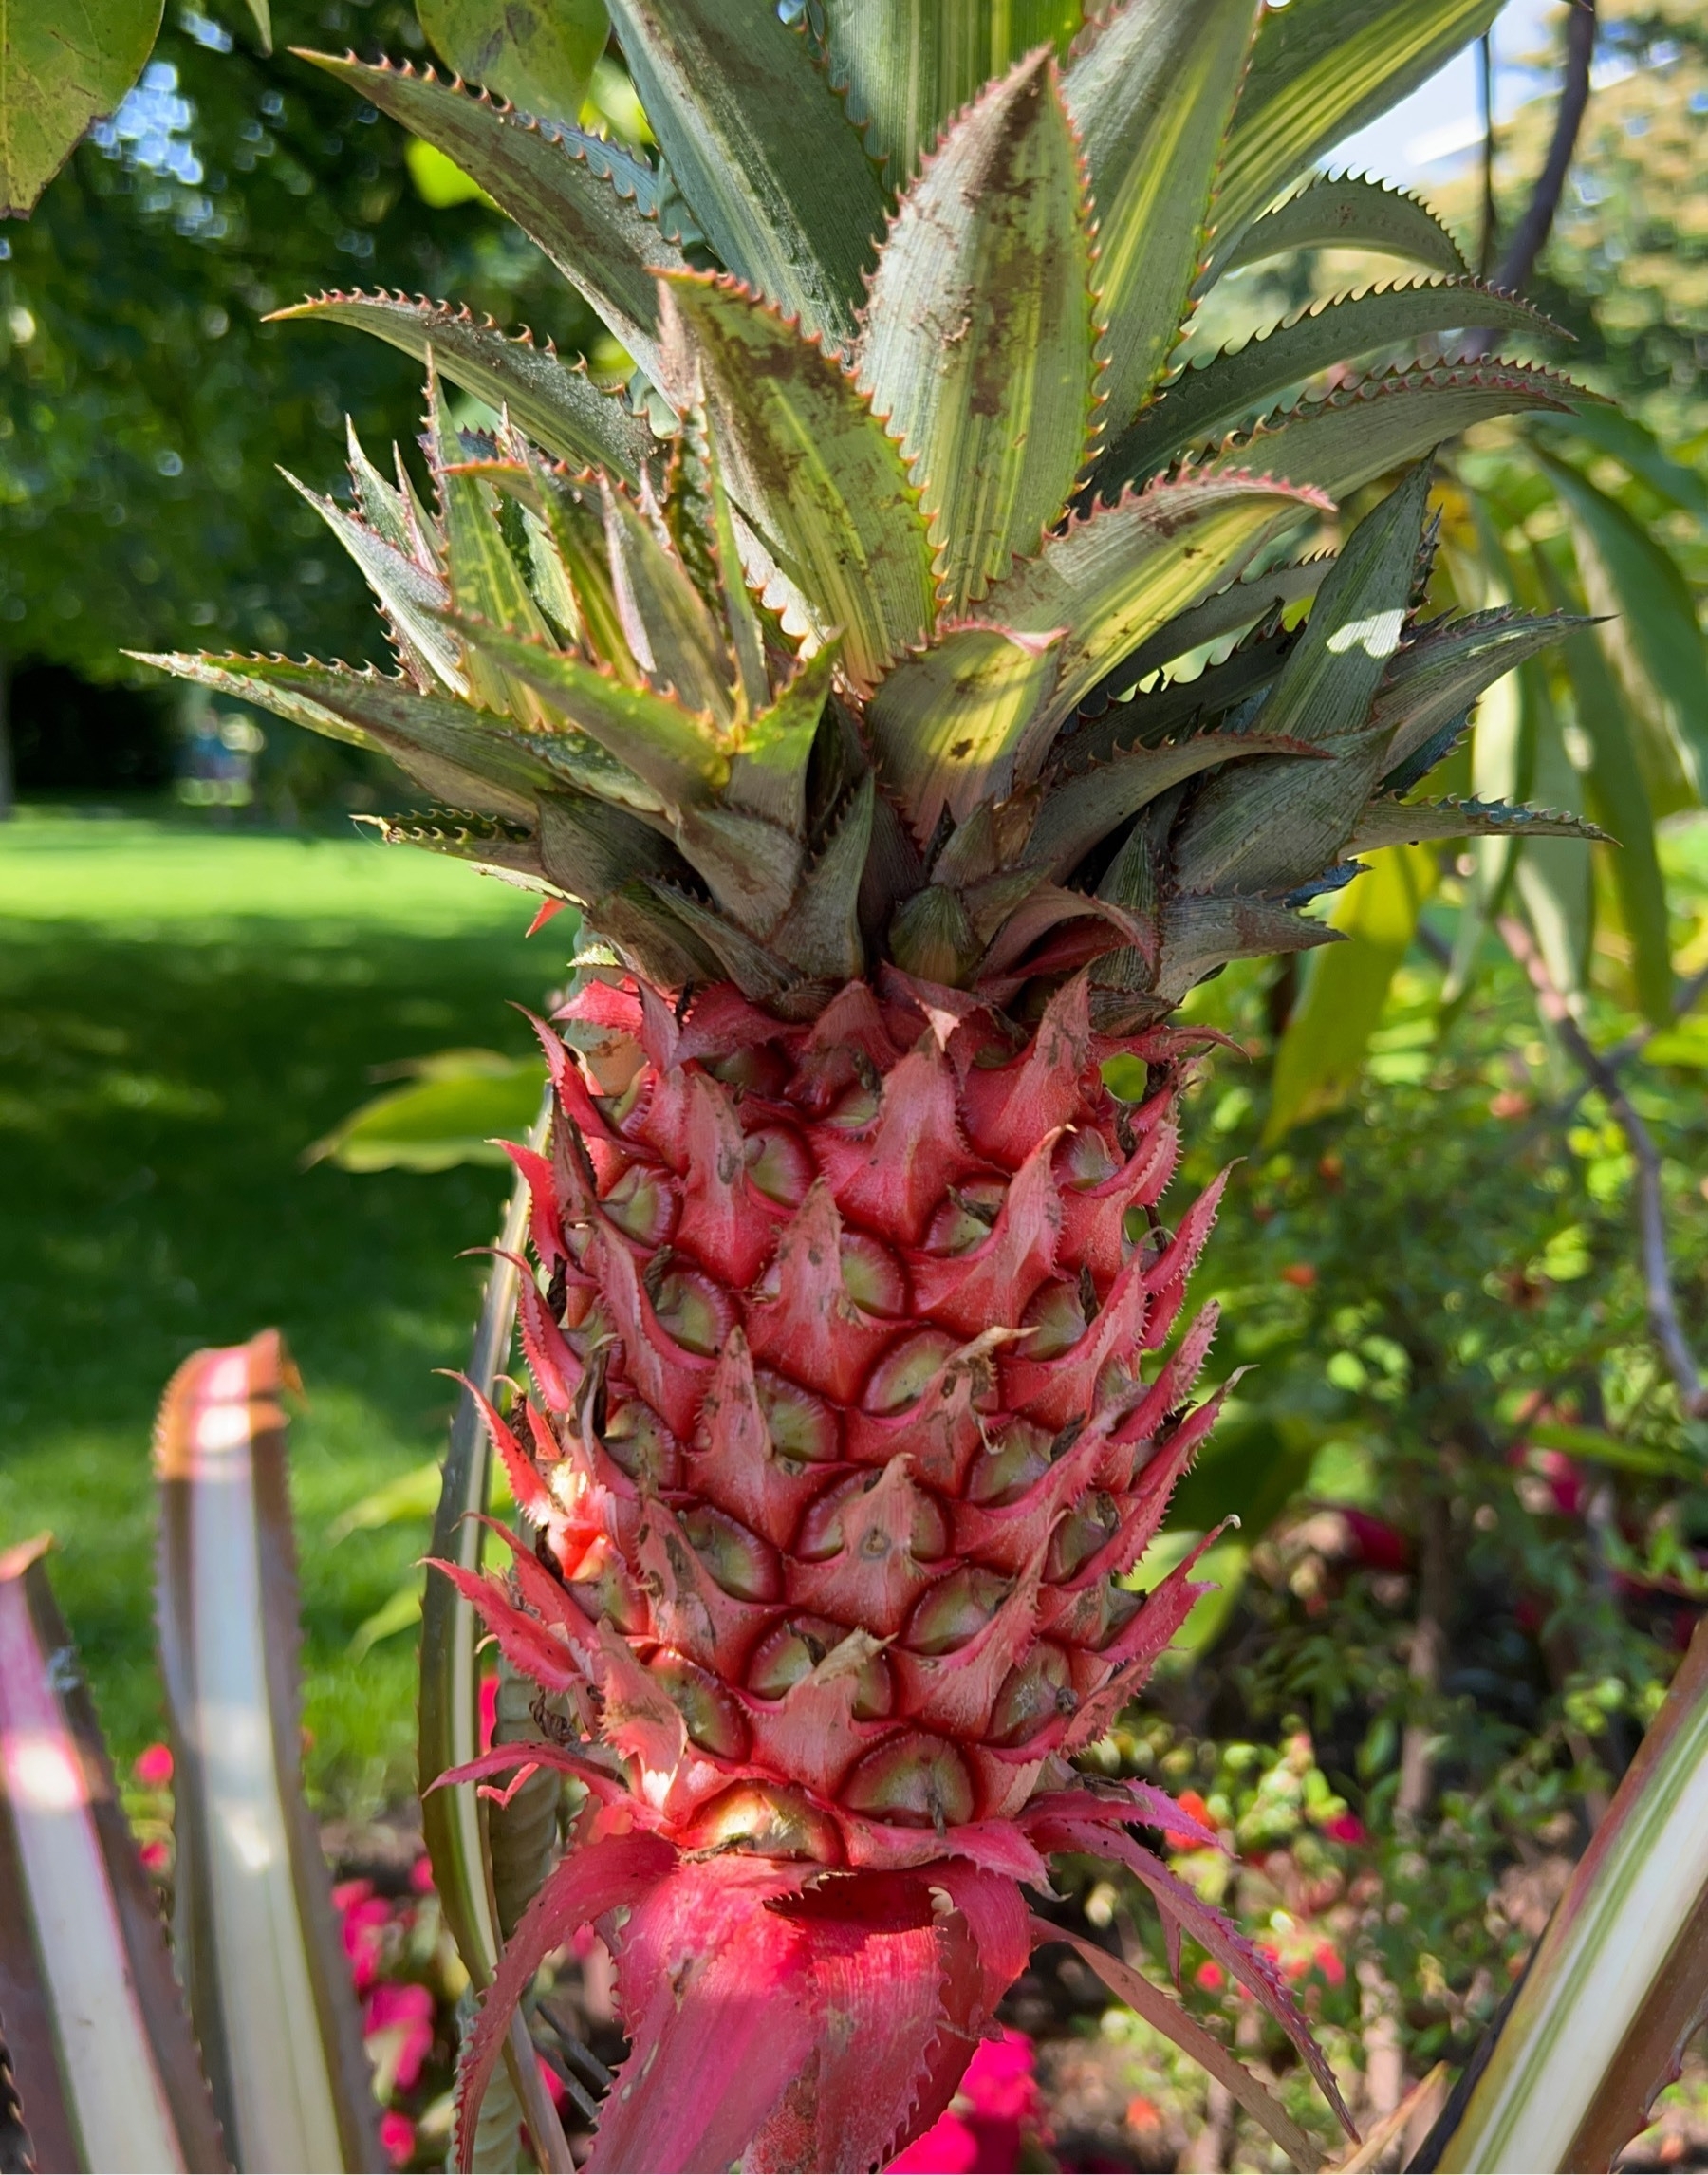 Reddish pineapple growing on a plant surrounded by leaves. 